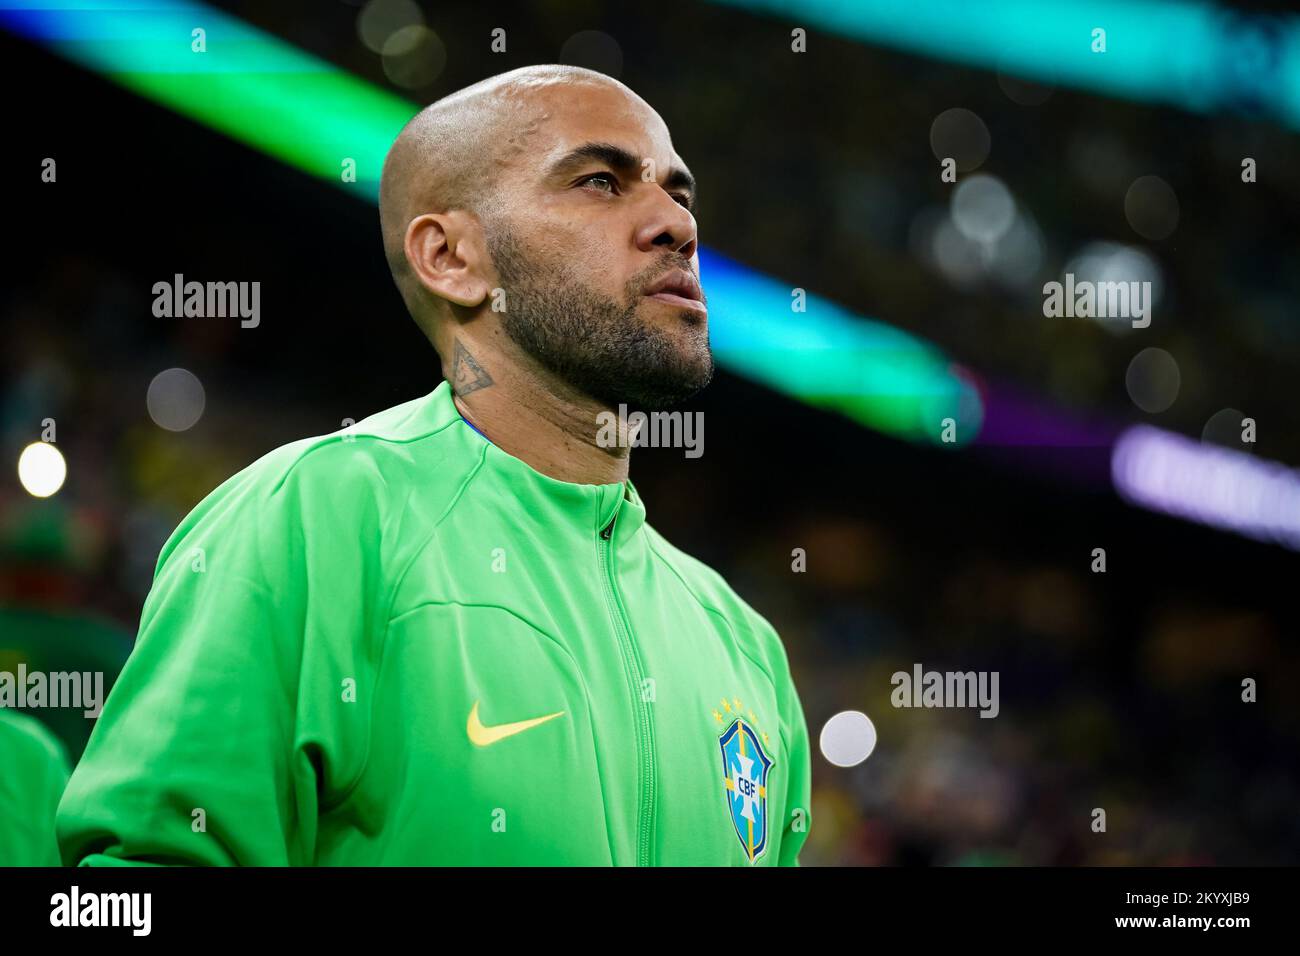 Lusail, Qatar. 02nd Dec, 2022. Lusail Stadium LUSAIL, QATAR - DECEMBER 2: Player of Brazil Dani Alves signs the national anthem before the FIFA World Cup Qatar 2022 group G match between Brazil and Cameroon at Lusail Stadium on December 2, 2022 in Lusail, Qatar. (Photo by Florencia Tan Jun/PxImages) (Florencia Tan Jun/SPP) Credit: SPP Sport Press Photo. /Alamy Live News Stock Photo